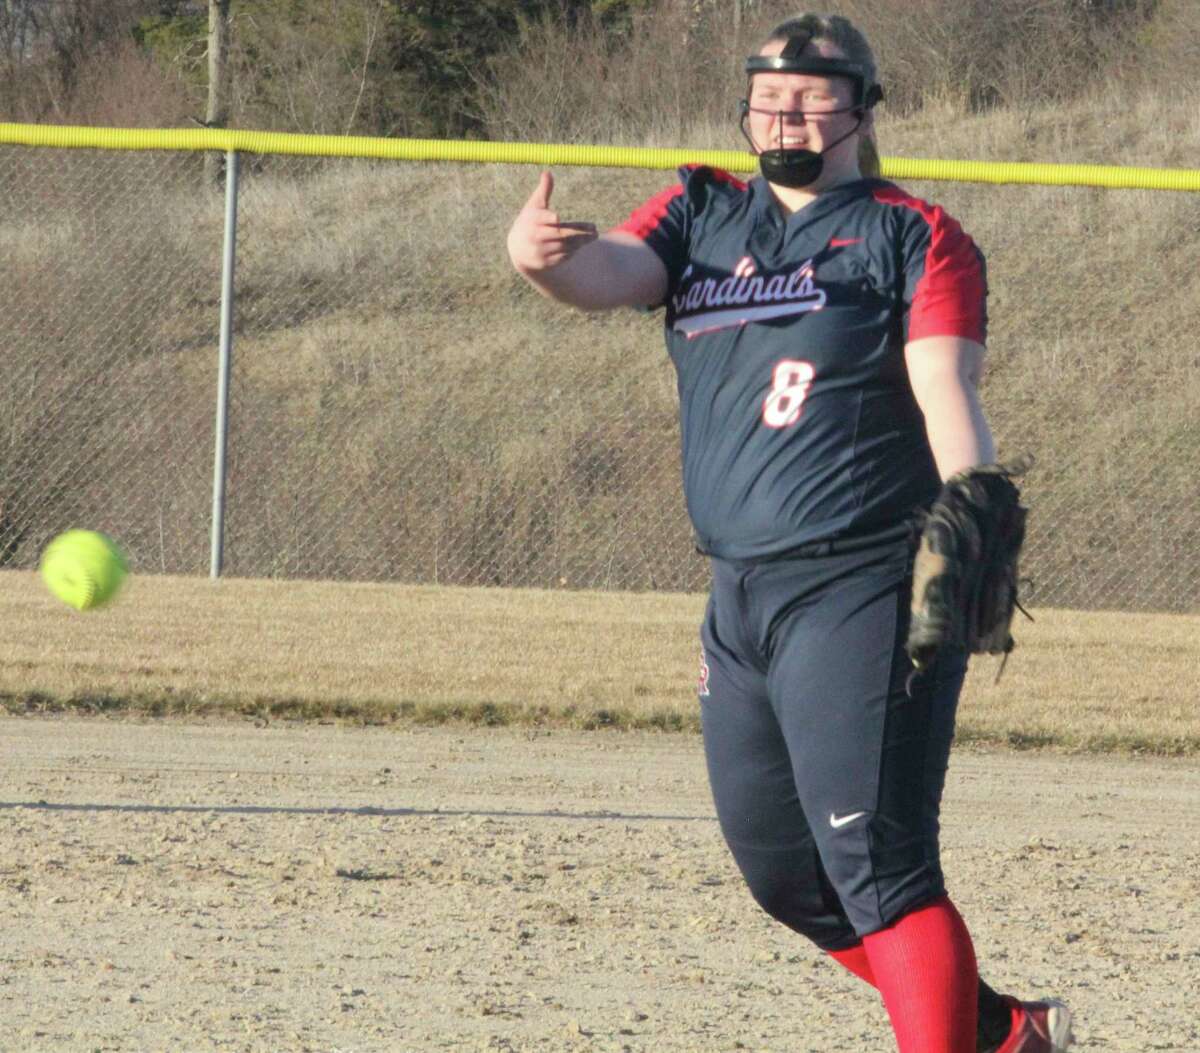 Alissa Ruggles delivers a pitch during the 2019 season. (Pioneer file photo)